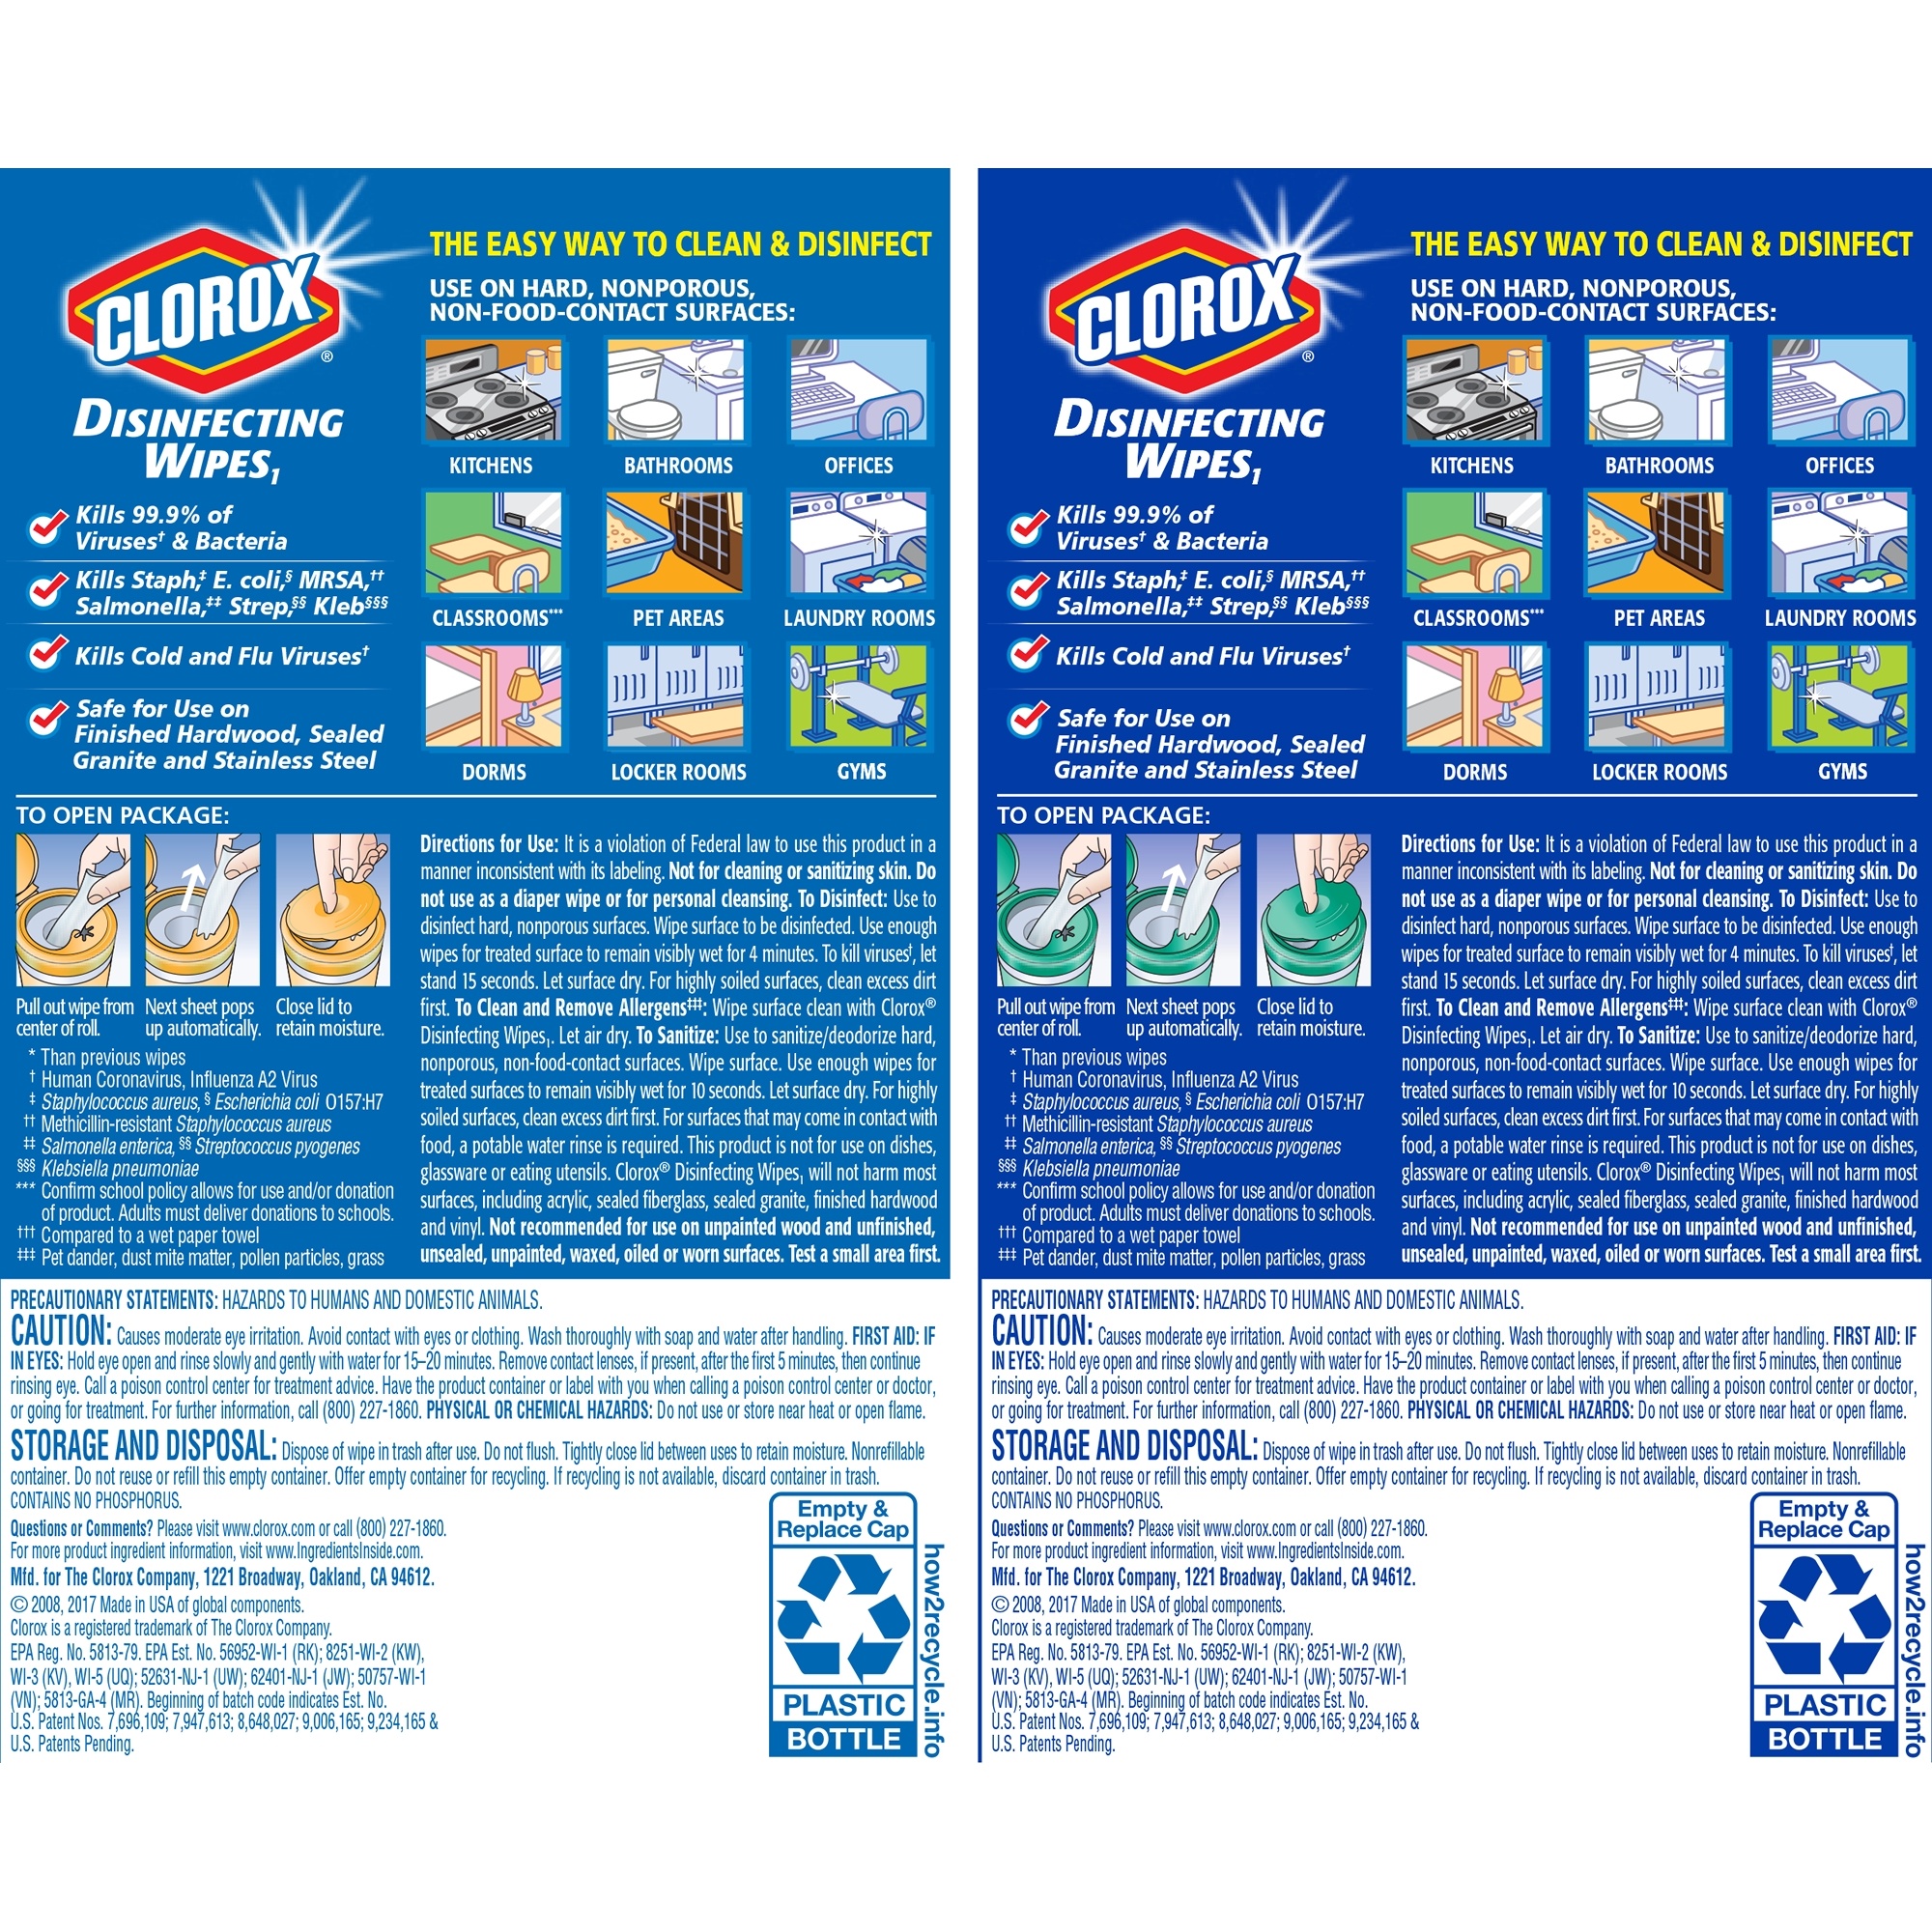 Clorox Disinfecting Wipes (140 Count Value Pack), Bleach Free Cleaning Wipes - 4 Pack - 35 Count Each - image 5 of 12